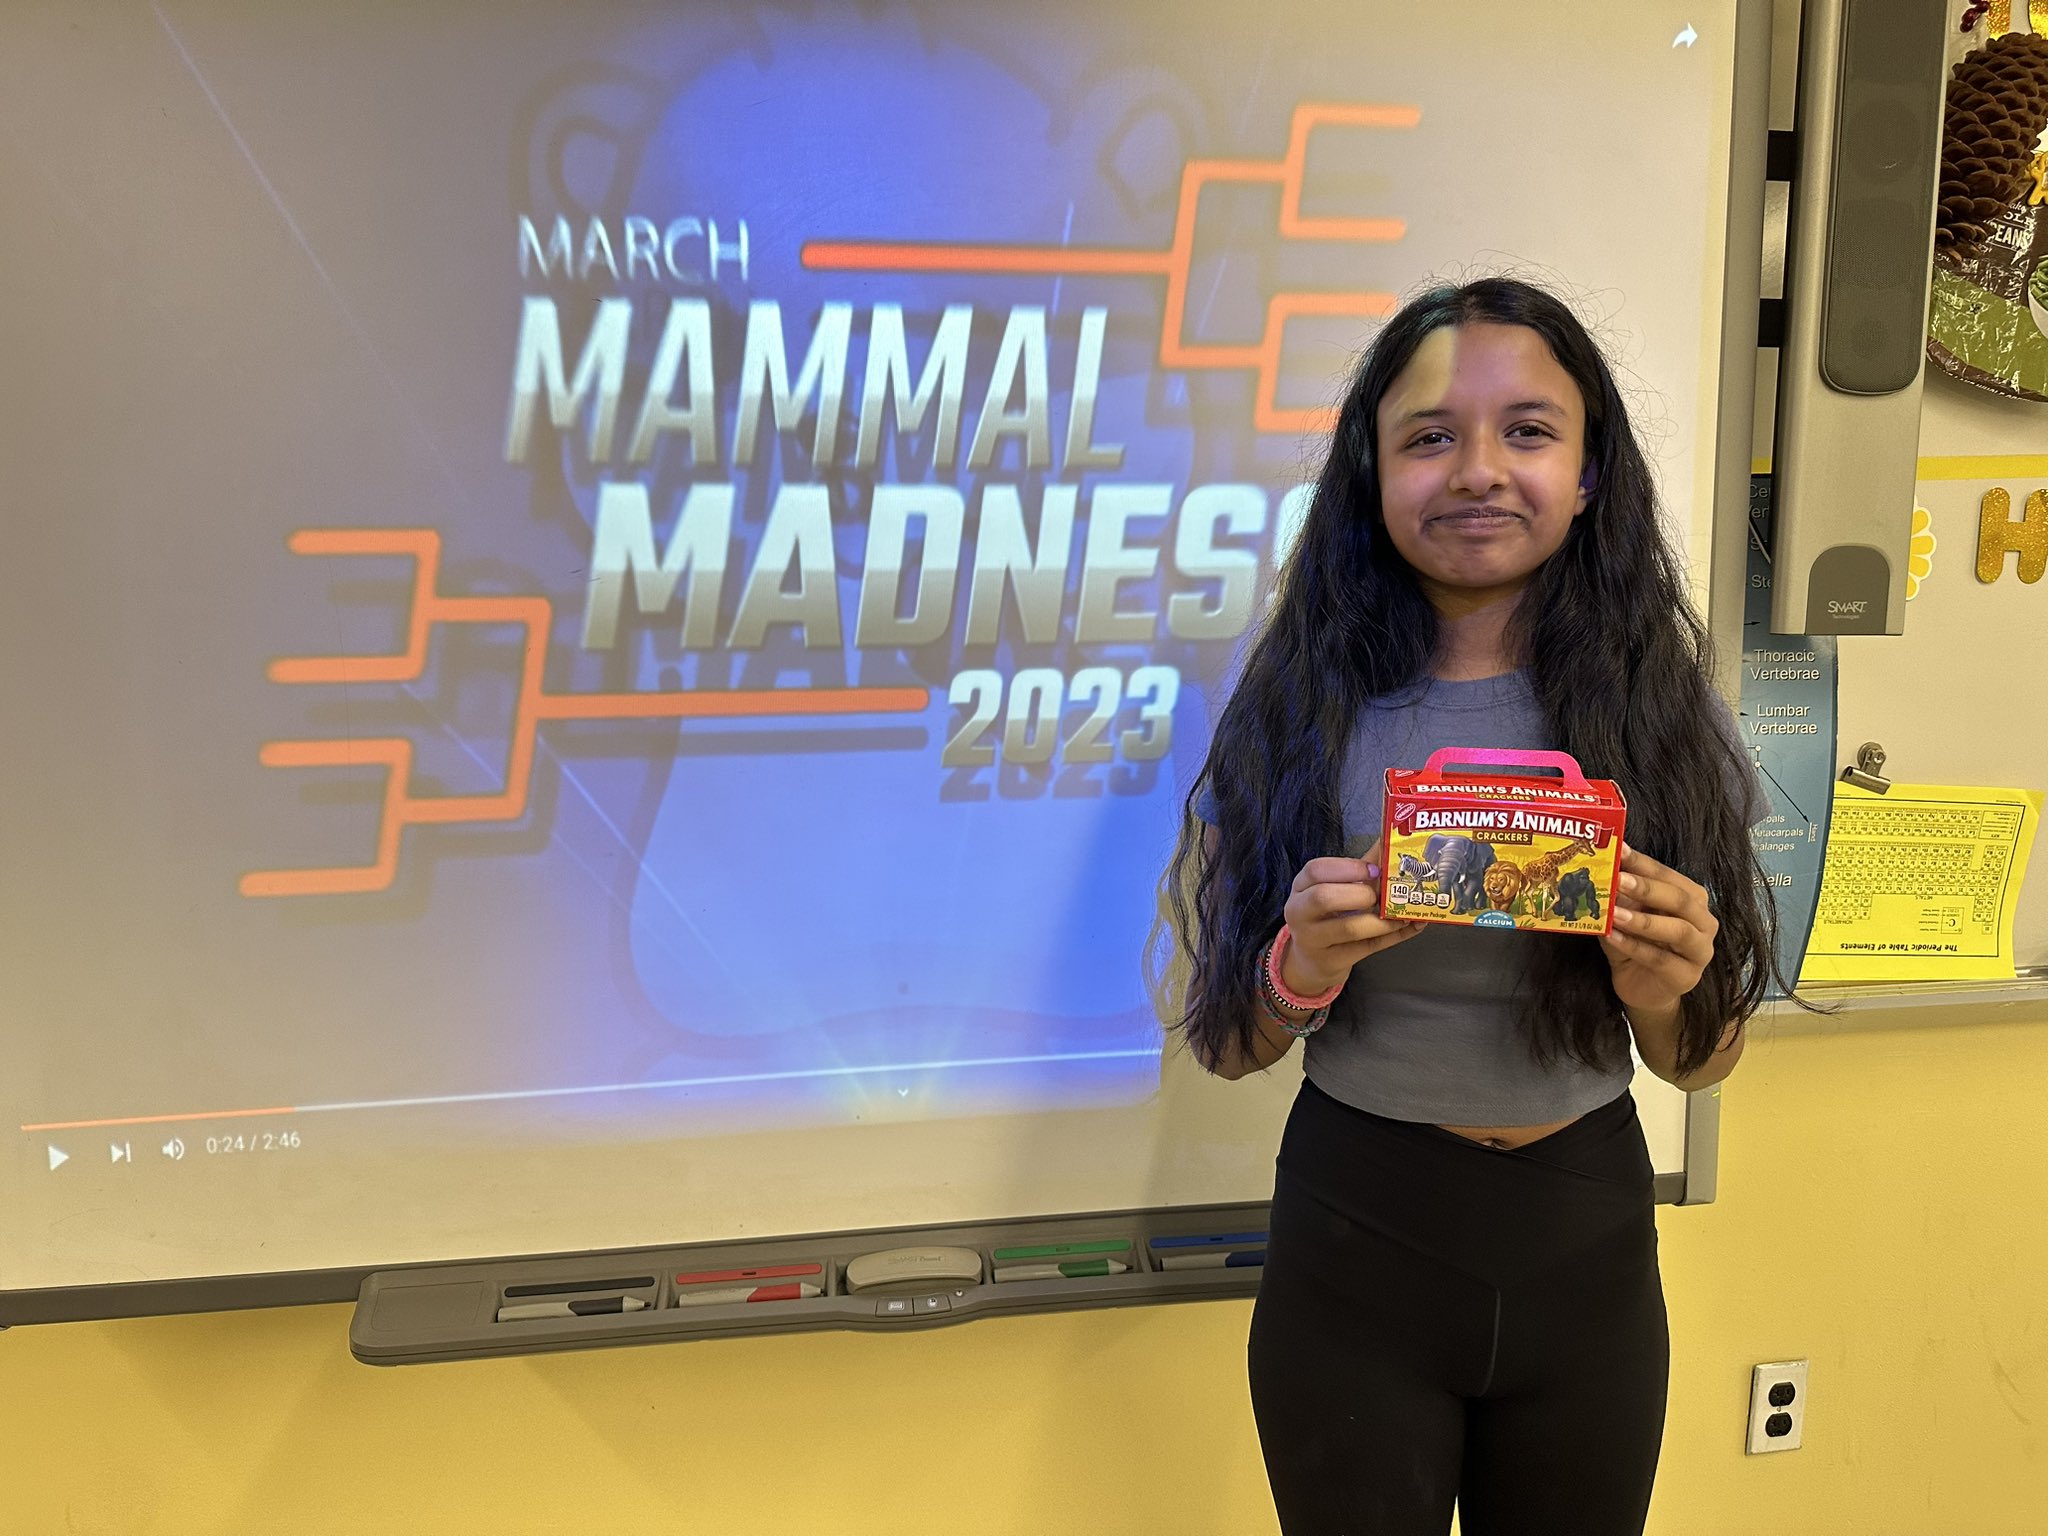 March Mammal Madness on Twitter "THE WINNER OF THE 2023MMM